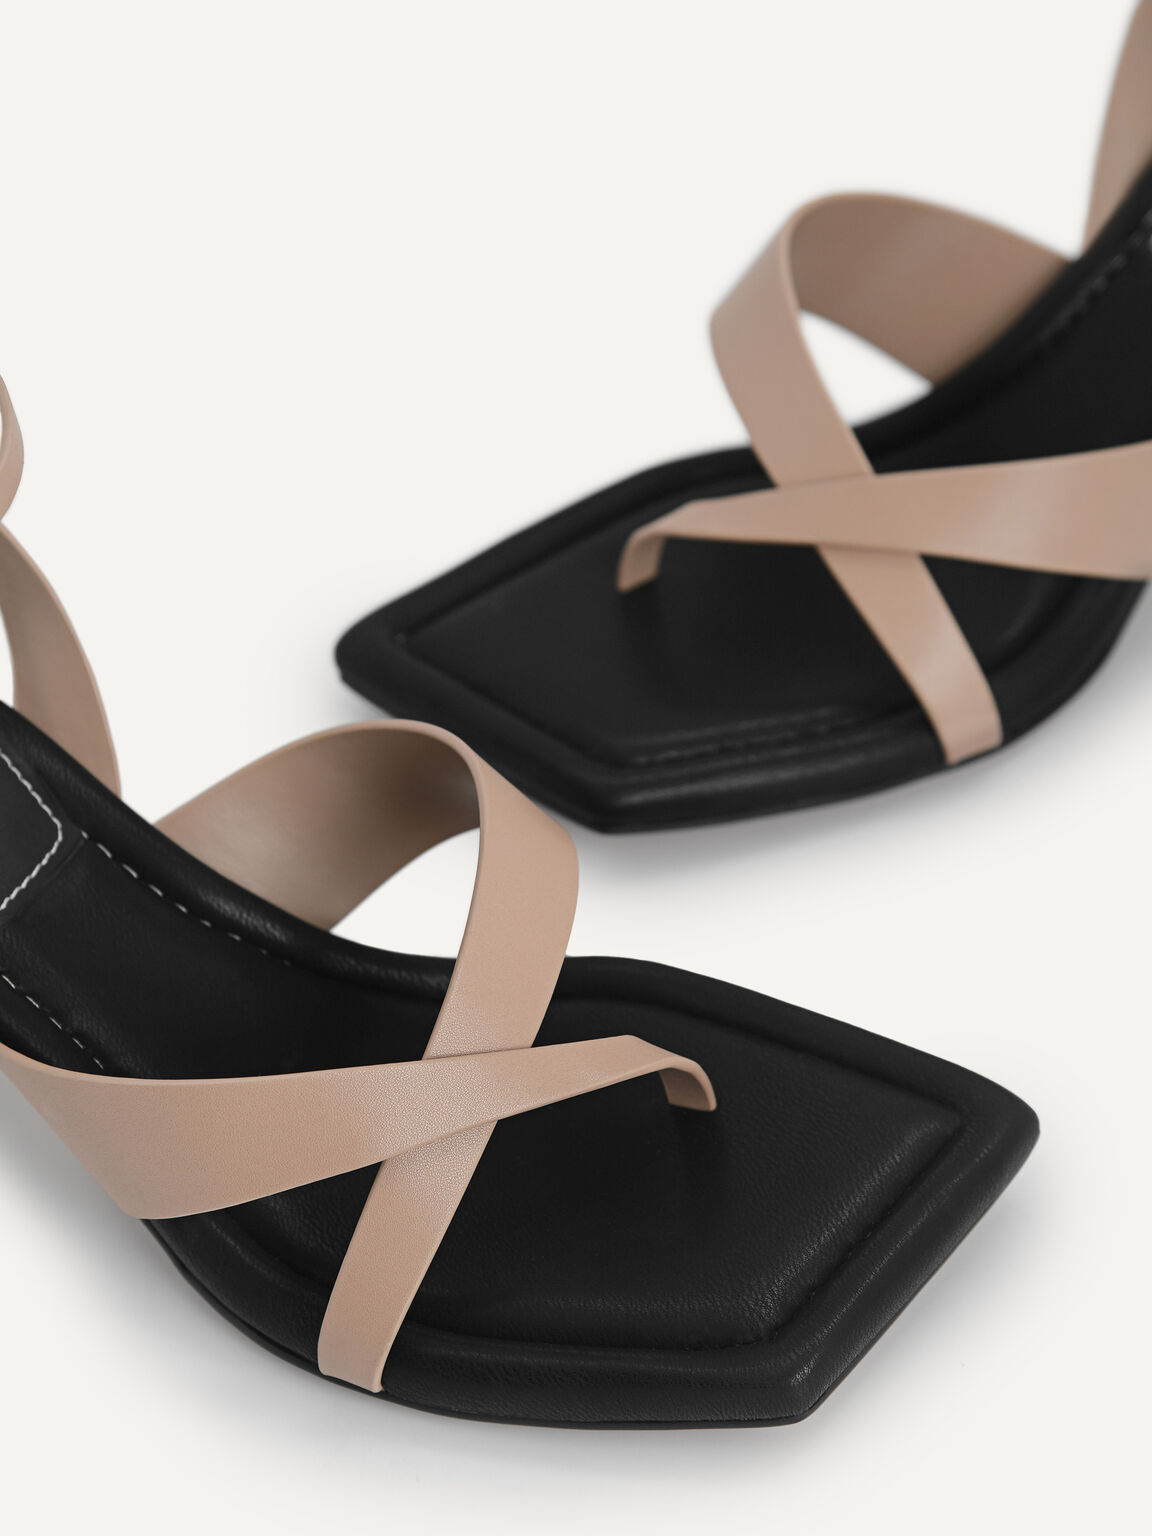 Strappy Square-Toe Heeled Sandals, Taupe, hi-res